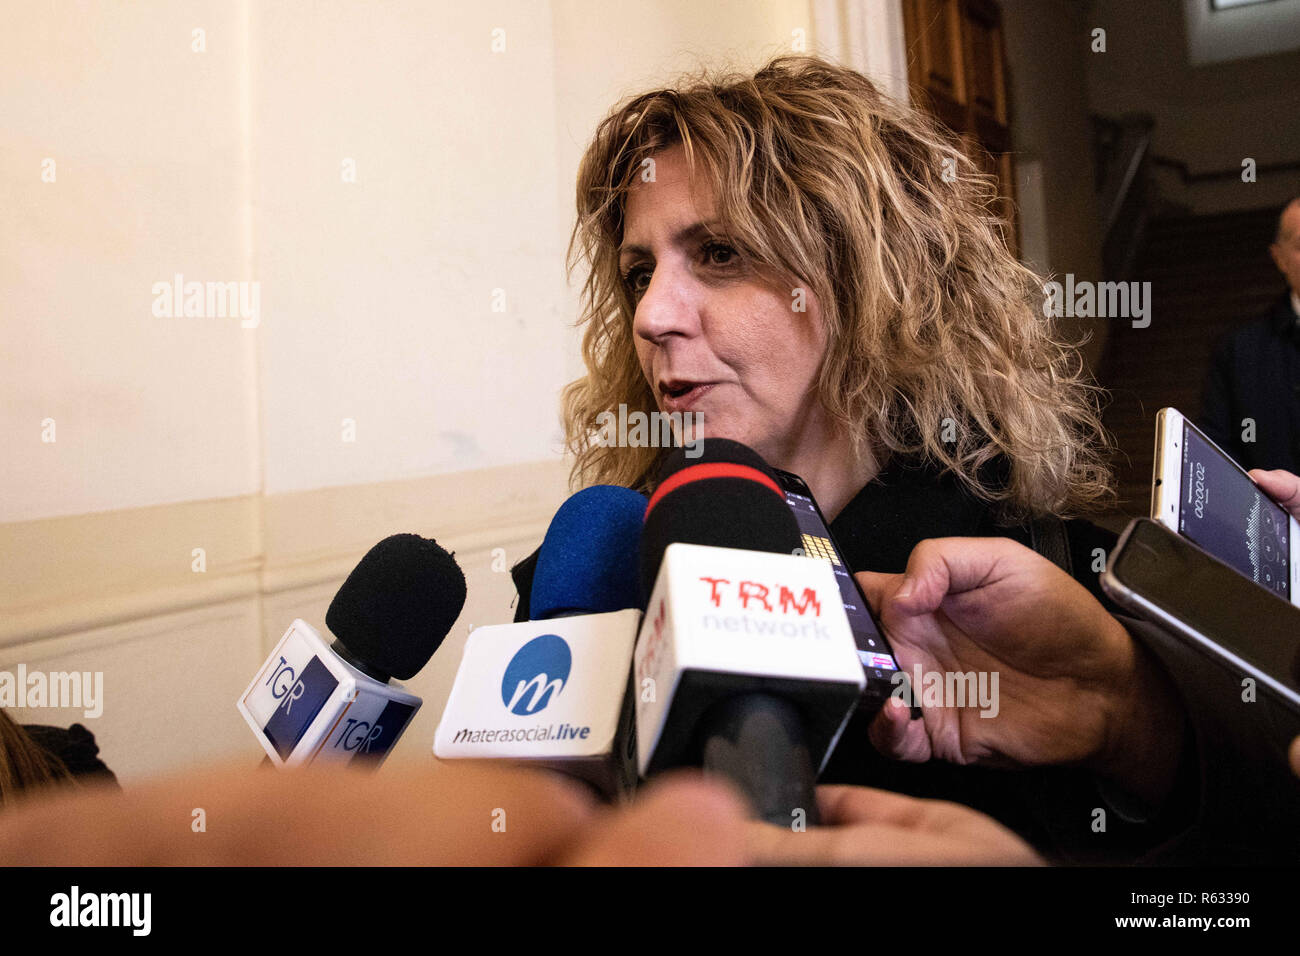 Matera, MT, Italy. 3rd Dec, 2019. The Minister of the South Barbara lezzi seen speaking at a press conference after the coordination meeting with the Municipality of Matera, the Matera Foundation 2019, FAL, Anas, Invitalia to check the time schedule of the infrastructural works planned for Matera 2019. Credit: Cosimo Martemucci/SOPA Images/ZUMA Wire/Alamy Live News Stock Photo